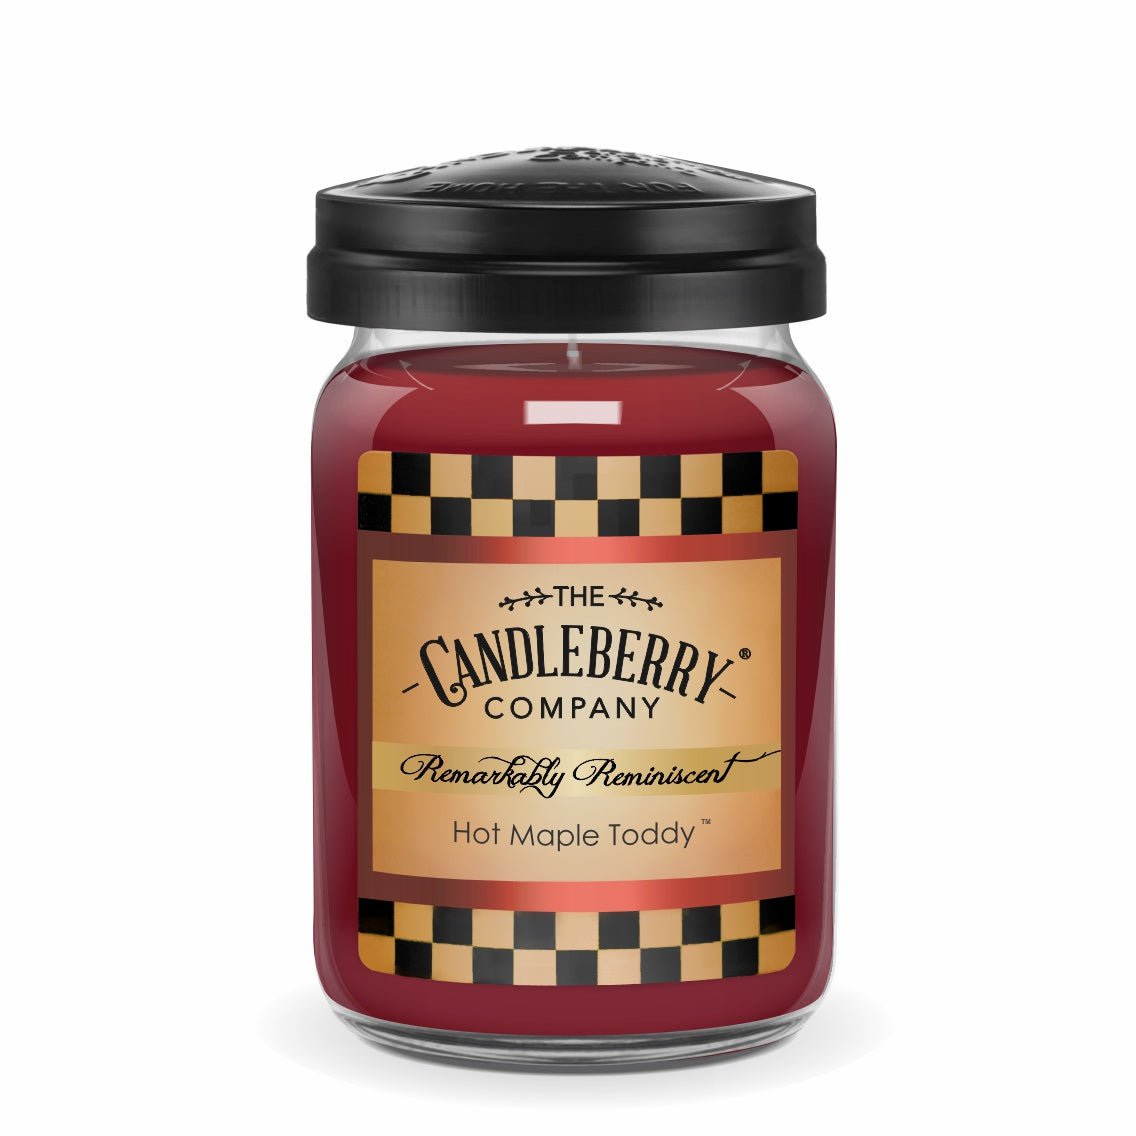 The Heritage Candleberry Hot Maple Toddy - 26 oz Jar